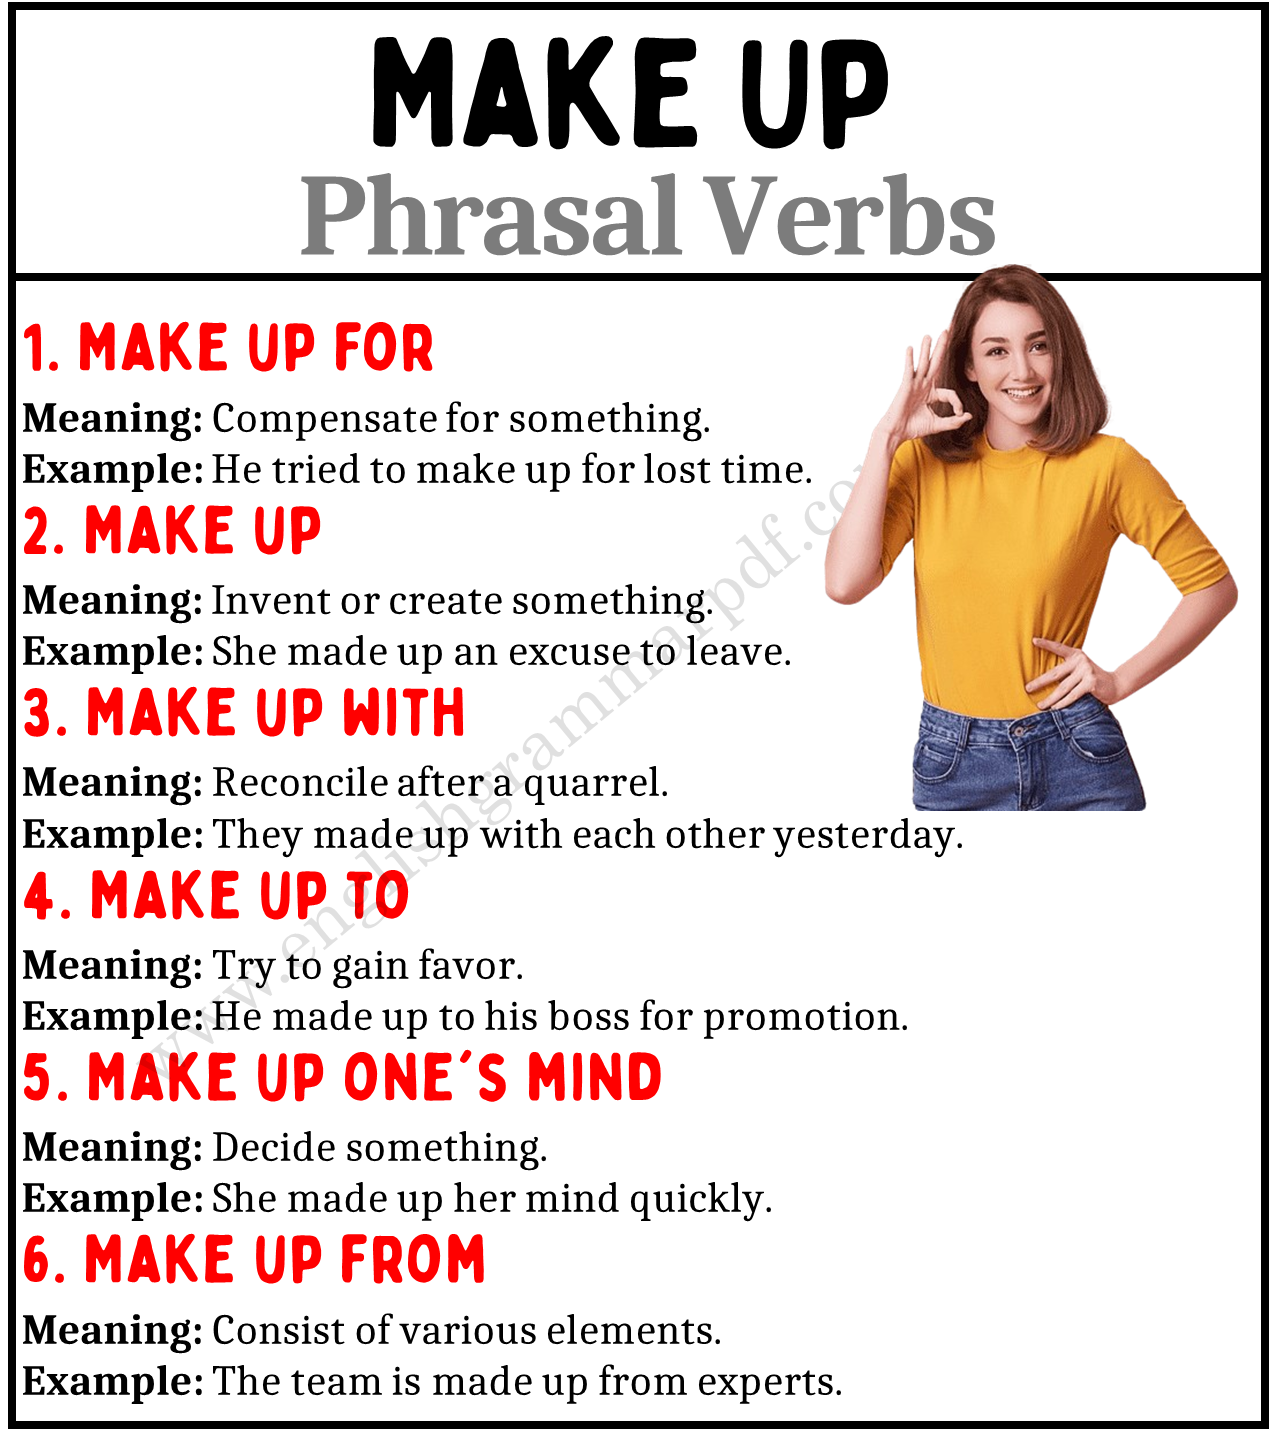 Phrasal Verbs with “Make Up”